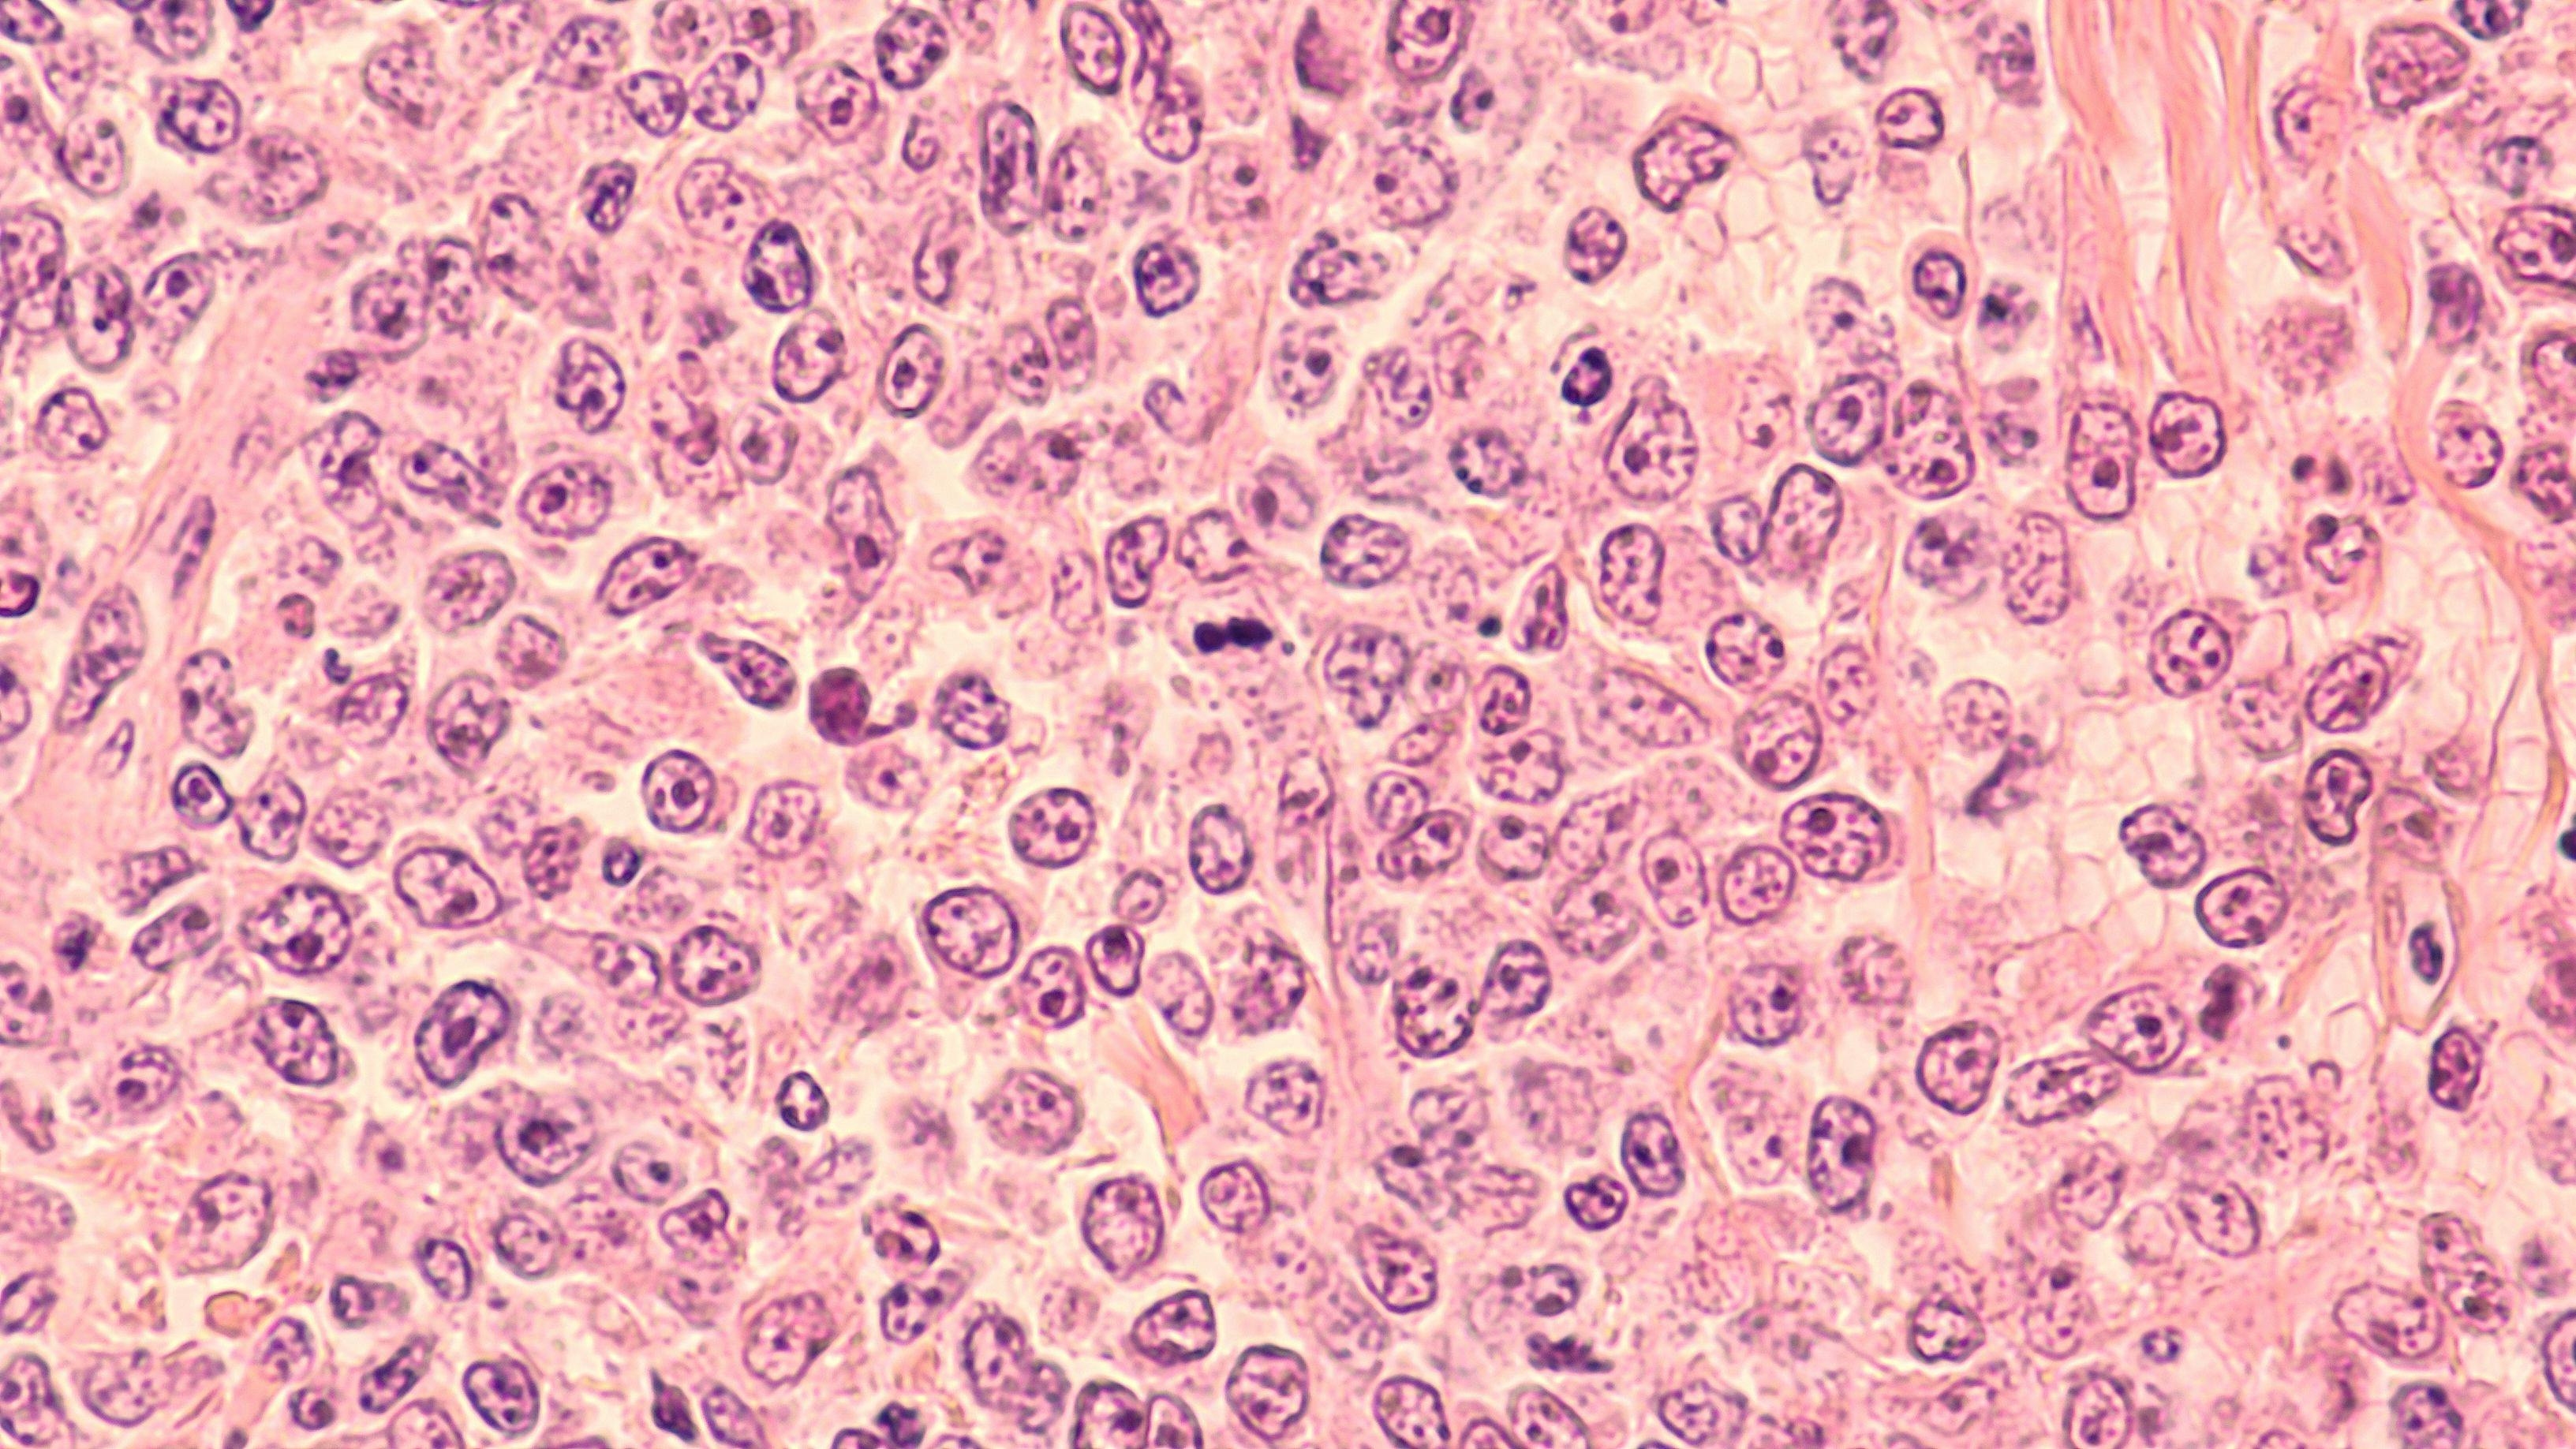 Lymphoma awareness: photomicrograph of a diffuse large B-cell lymphoma (DLBCL) a type of non-Hodgkin lymphoma. This case is from the testis of an elderly man and shows prominent nucleoli | Image Credit: © David A Litman - stock.adobe.com